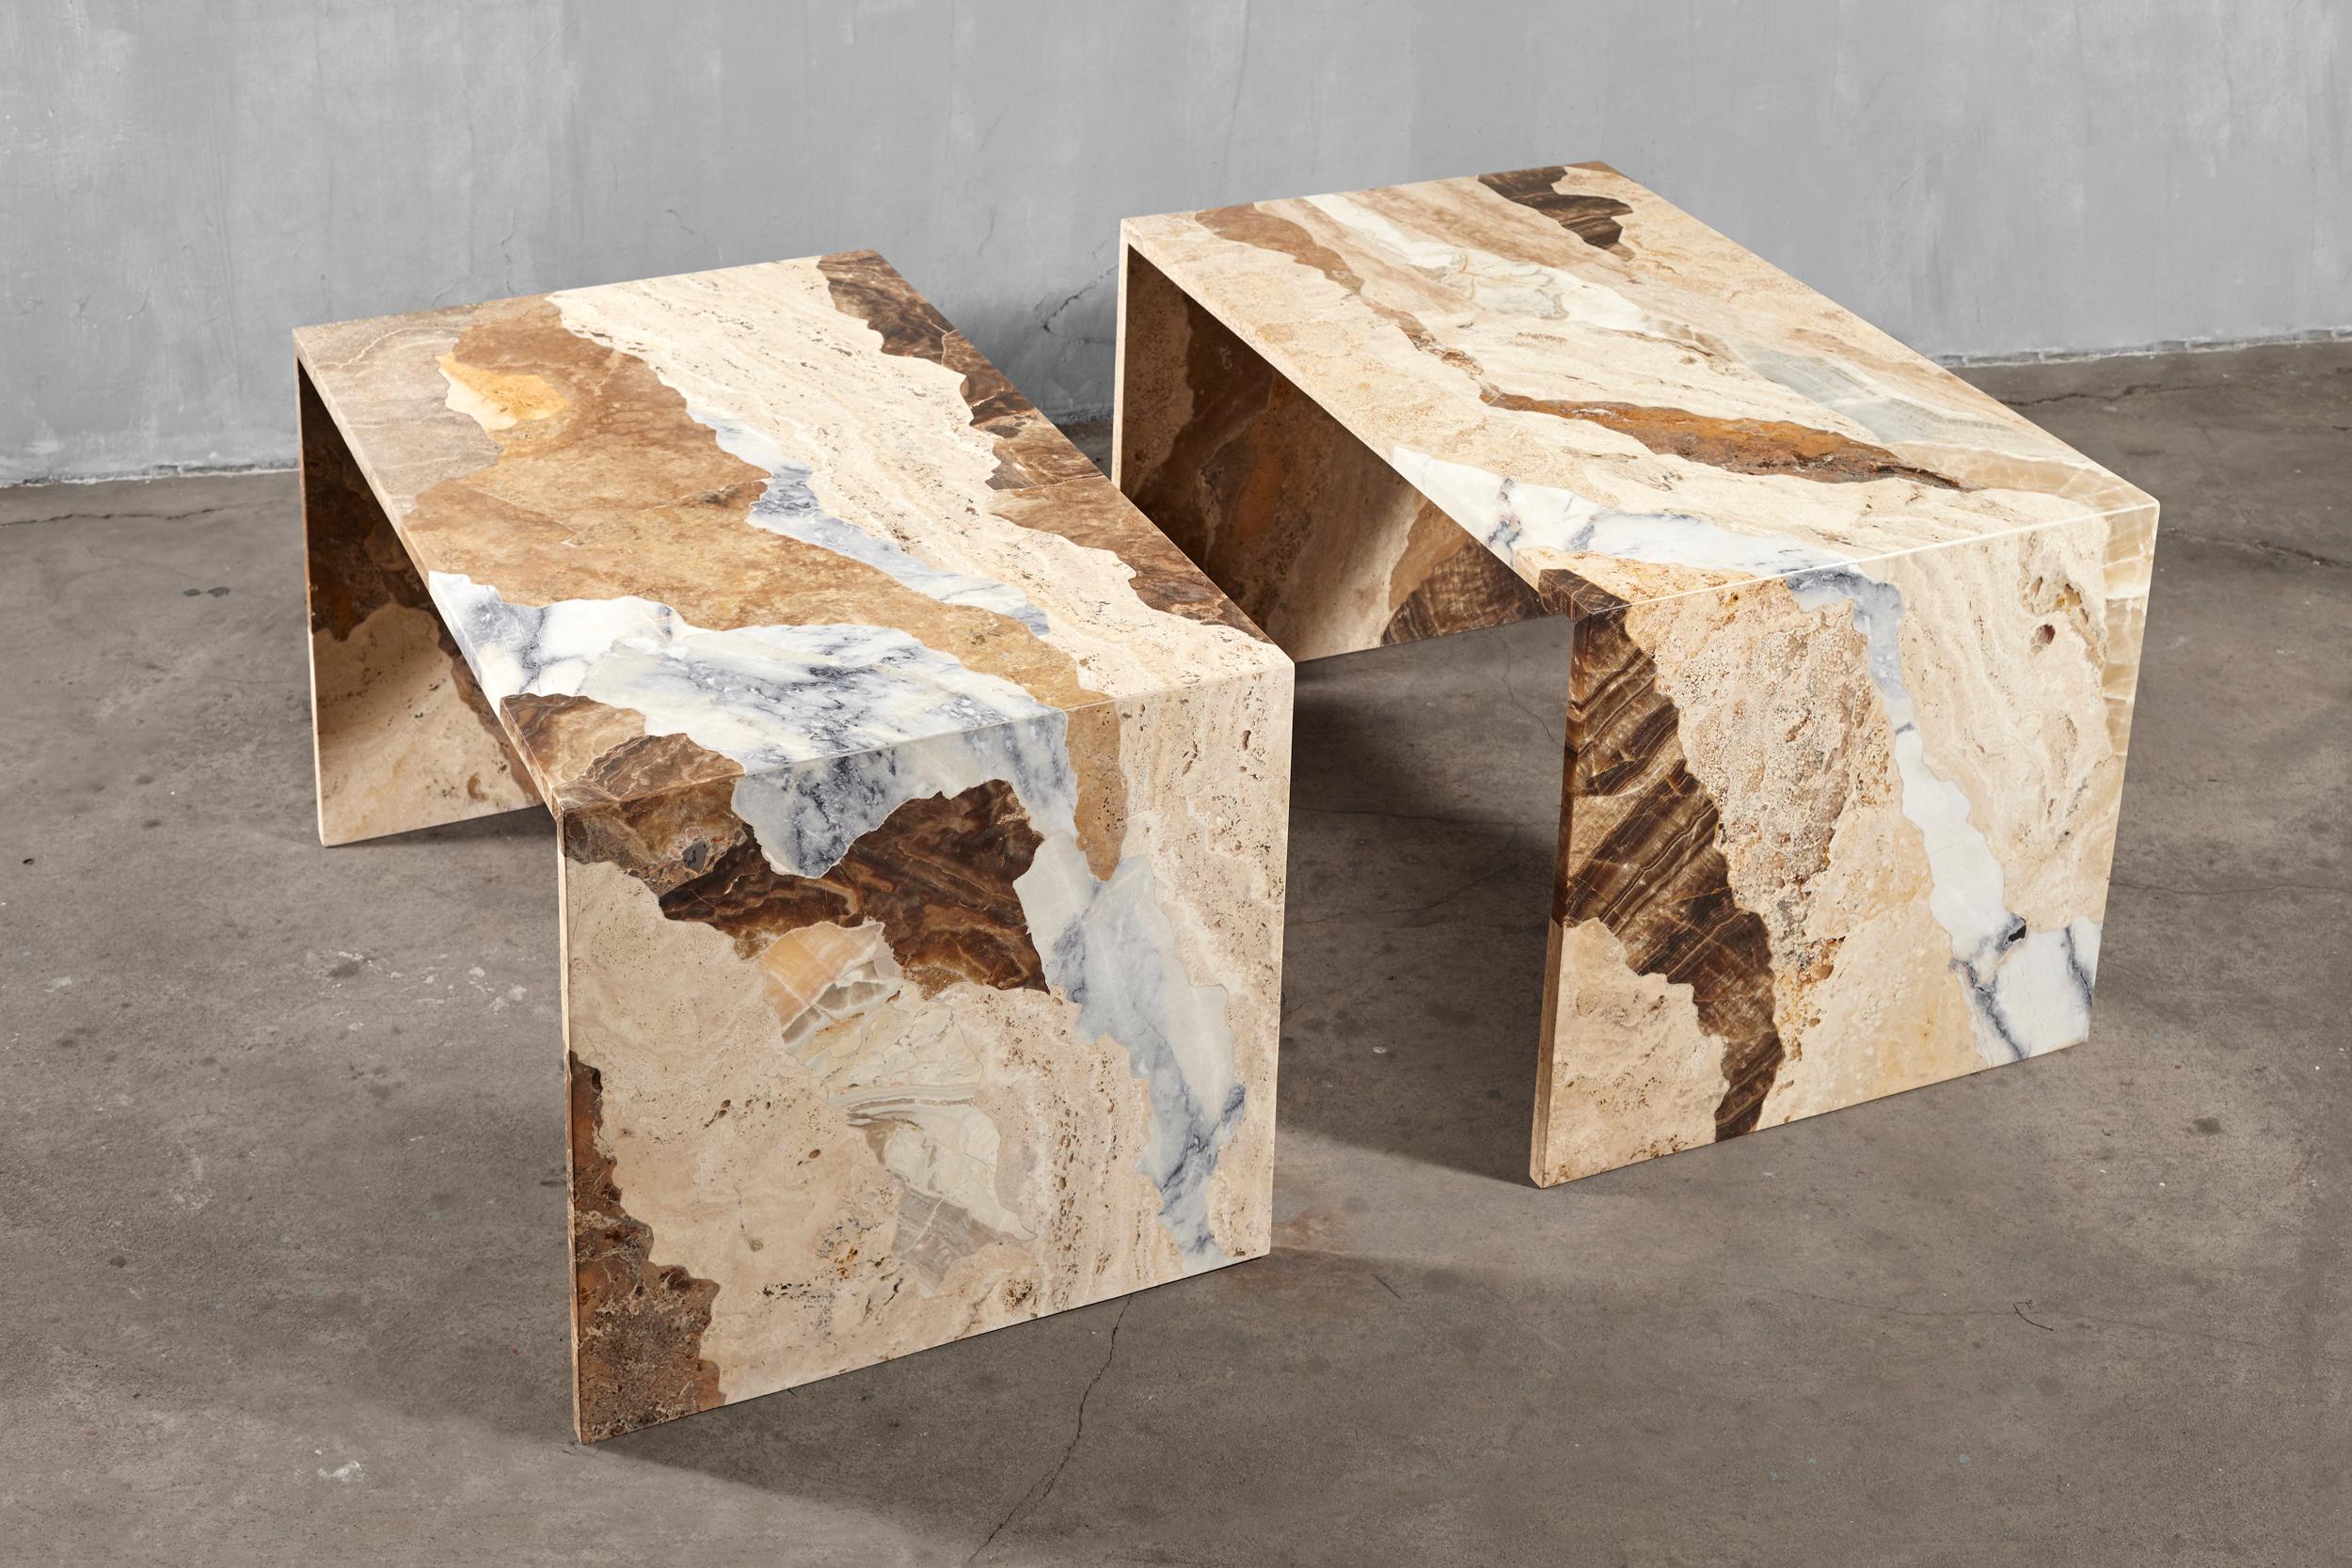 Soil Map N°1 table by Estudio Rafael Freyre
Dimensions: W 130 x D 80 x H 75 cm 
Materials: diverse recycled andes stones

The pieces in the Soil Map series are part of a quest to bring our bodies closer to the geography we inhabit, to the